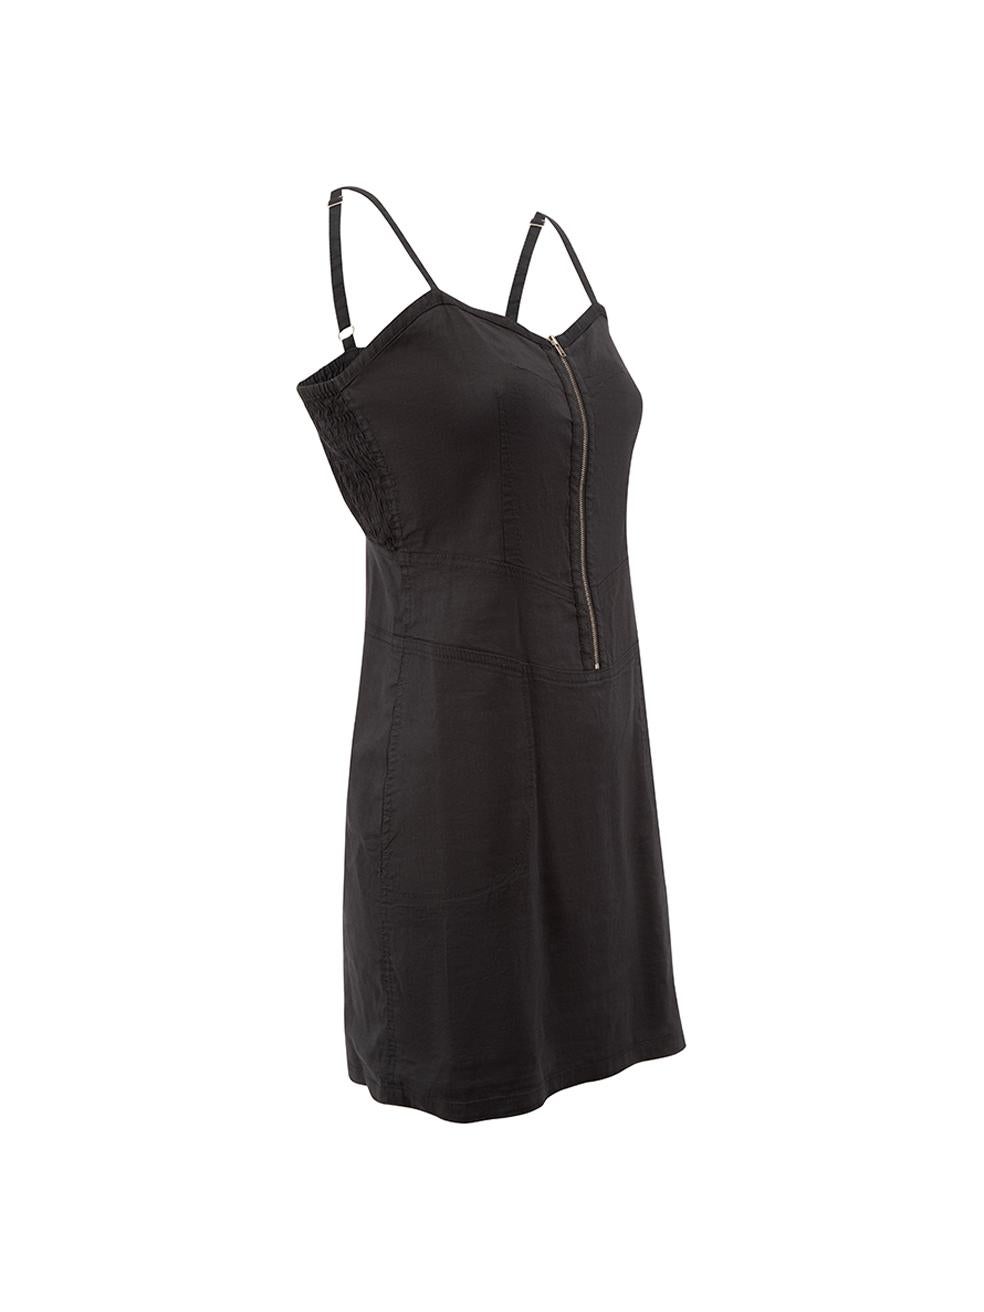 CONDITION is Very good. Hardly any visible wear to dress is evident on this used Theory designer resale item.

Details
Black
Linen
Dress
Sleeveless
Mini
Figure hugging fit
Adjustable shoulder straps
Shirred elasticated back
Sweetheart neckline
Front